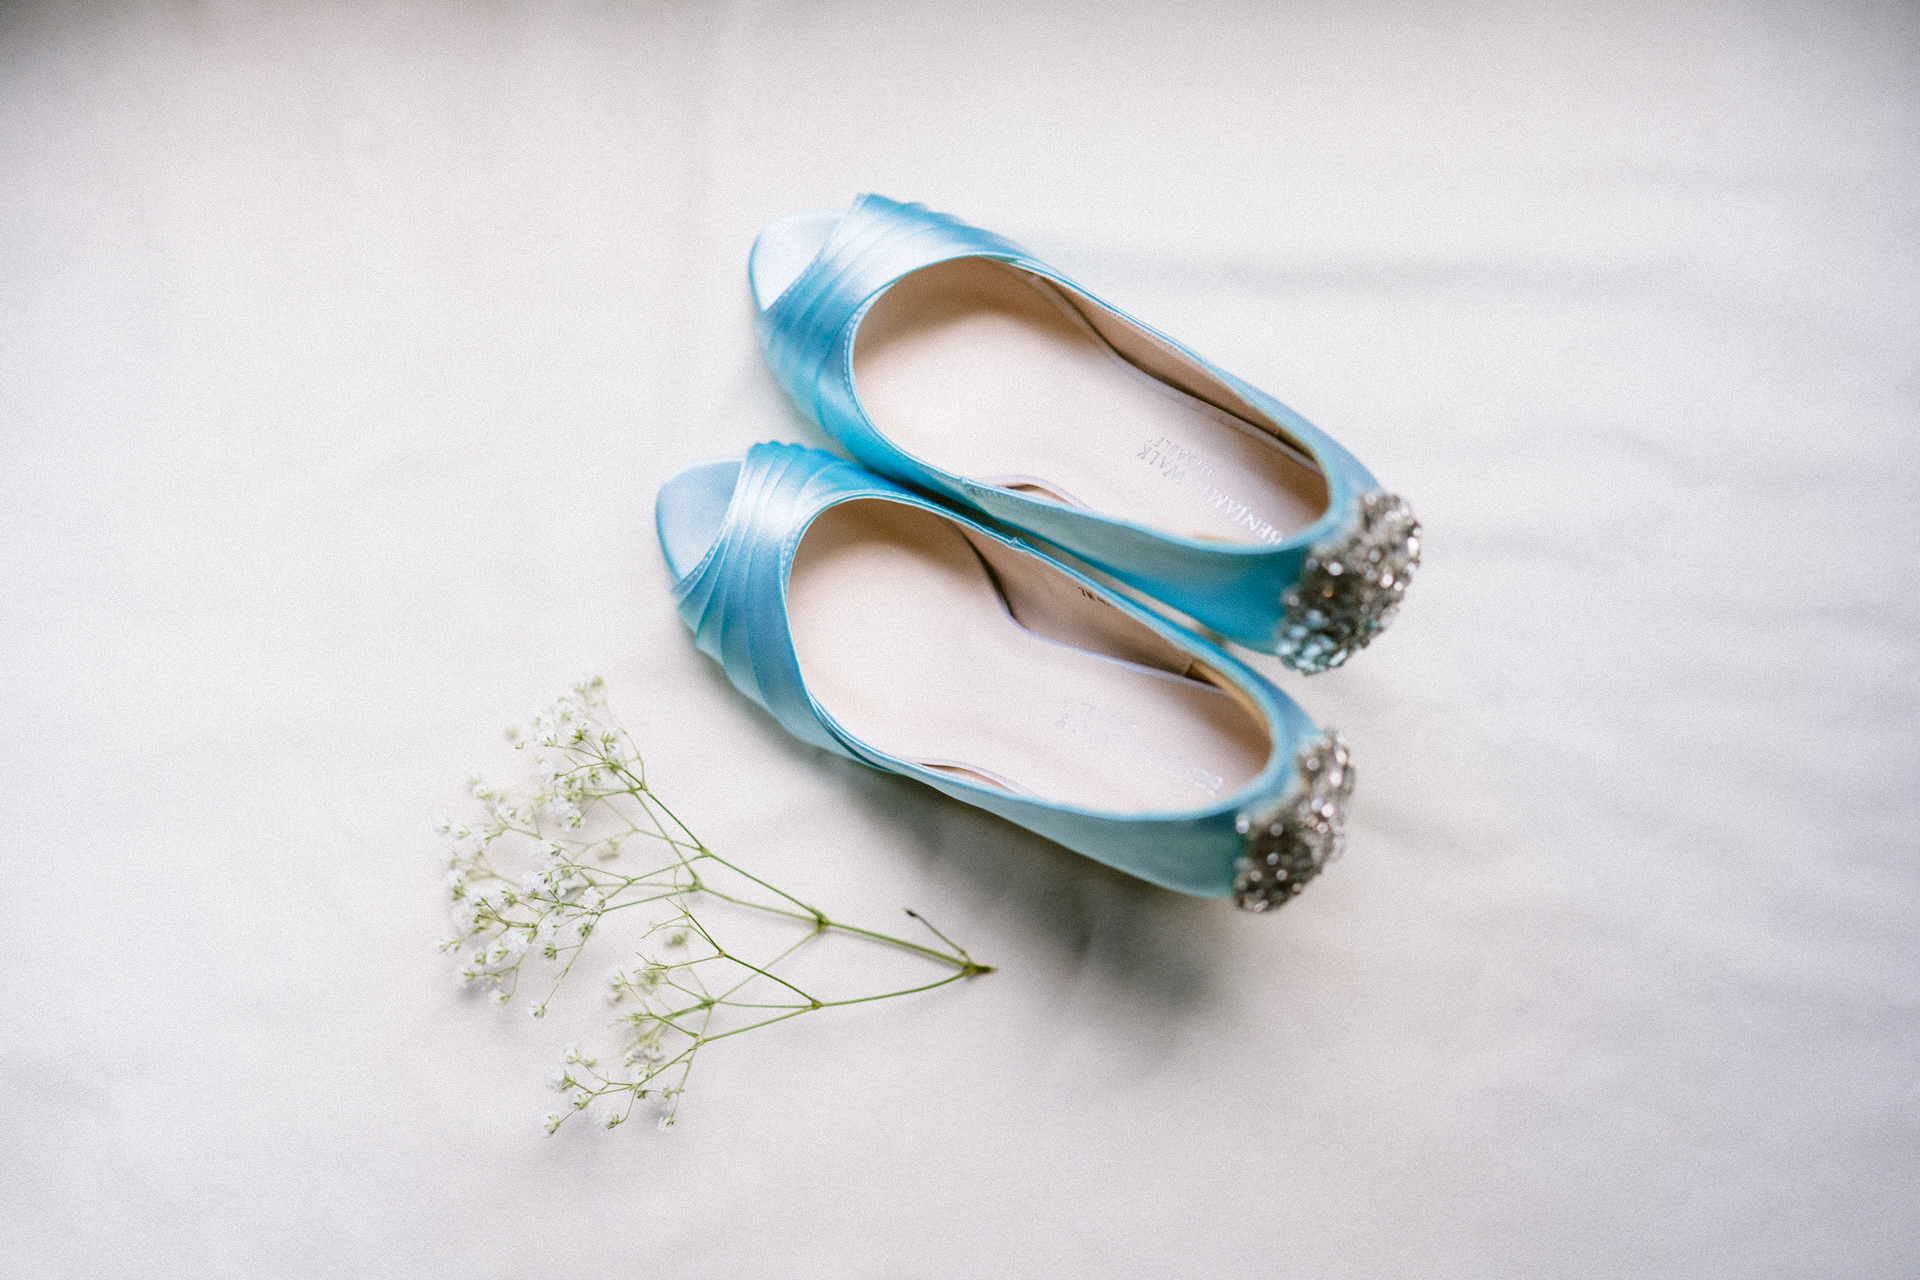 A pair of blue bridal shoes positioned next to delicate white flowers on a light background